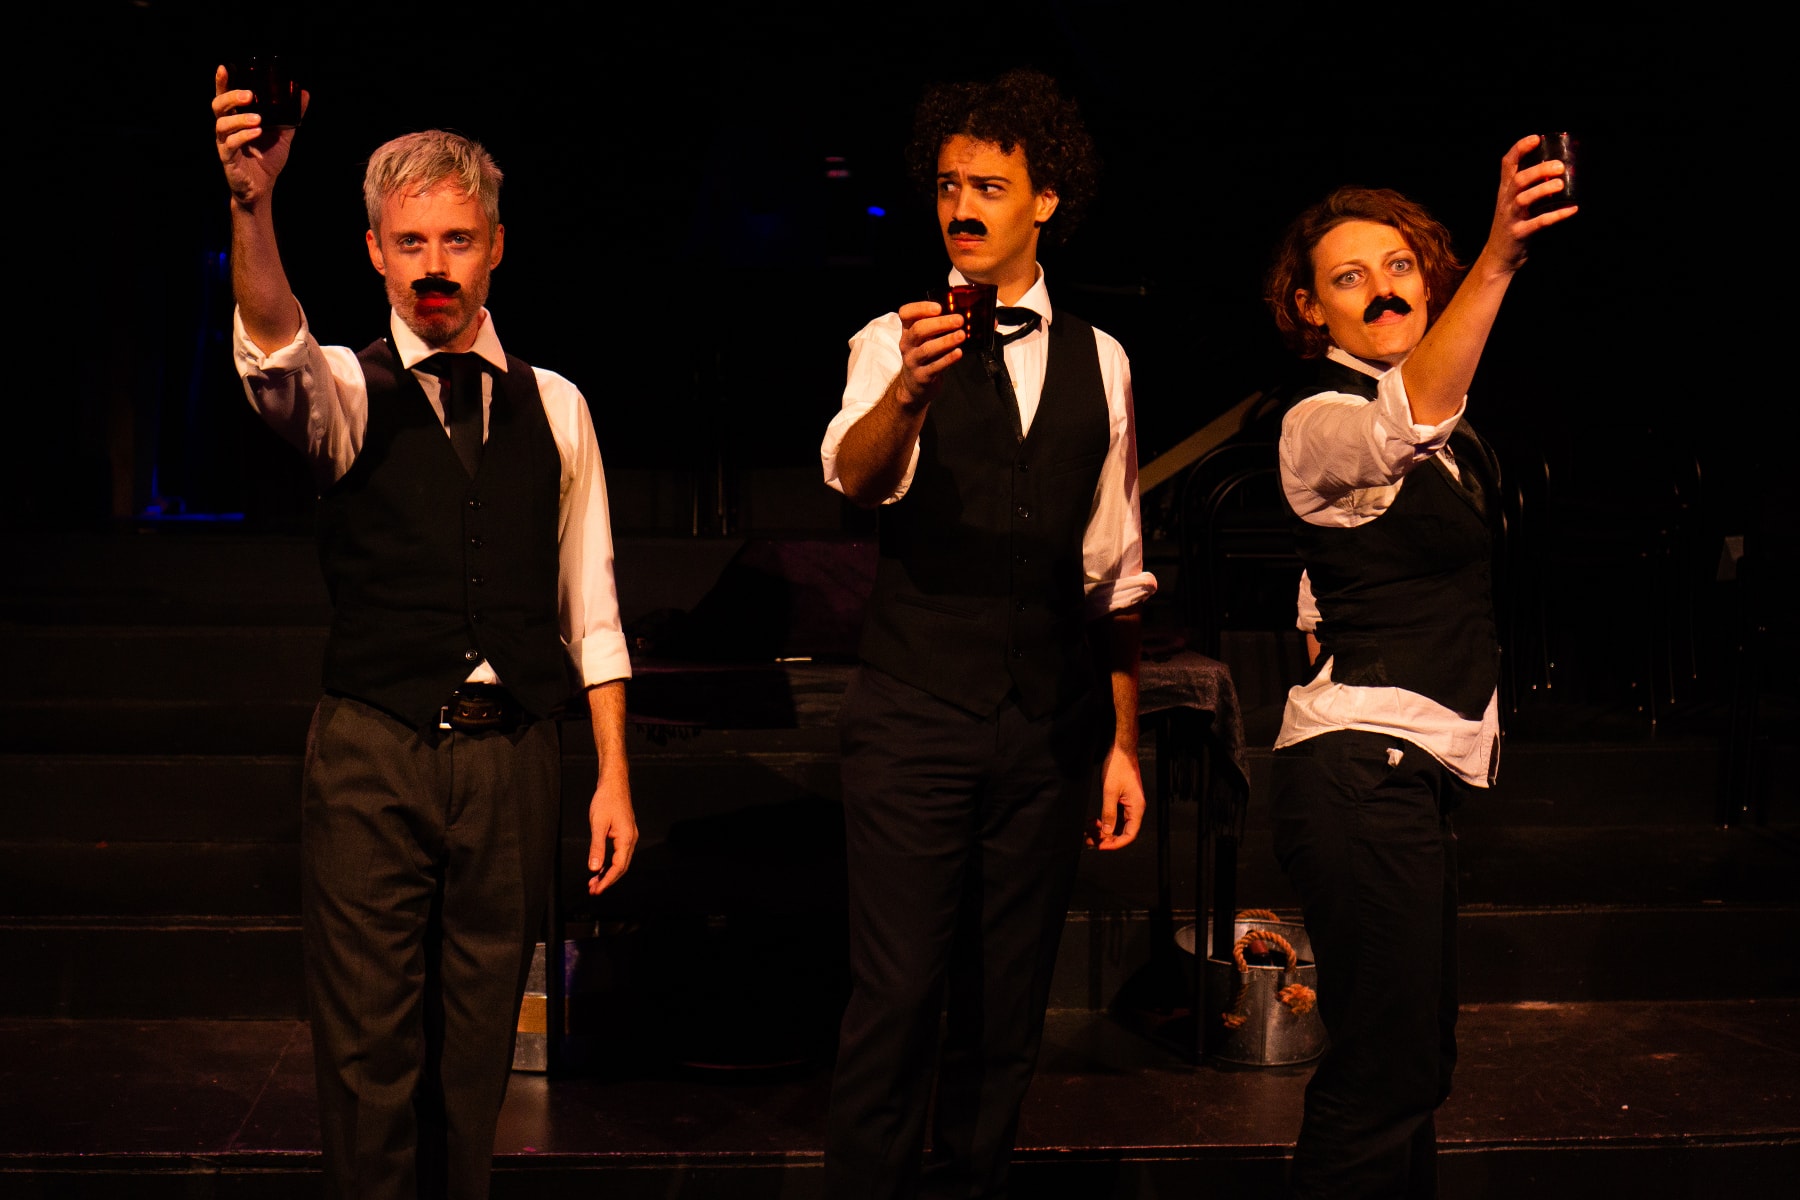 L-R: Jon Reynolds, Alex Turner, and Kerry McGee in We Happy Few's A Midnight Dreary. Photo by Sam Reilly.